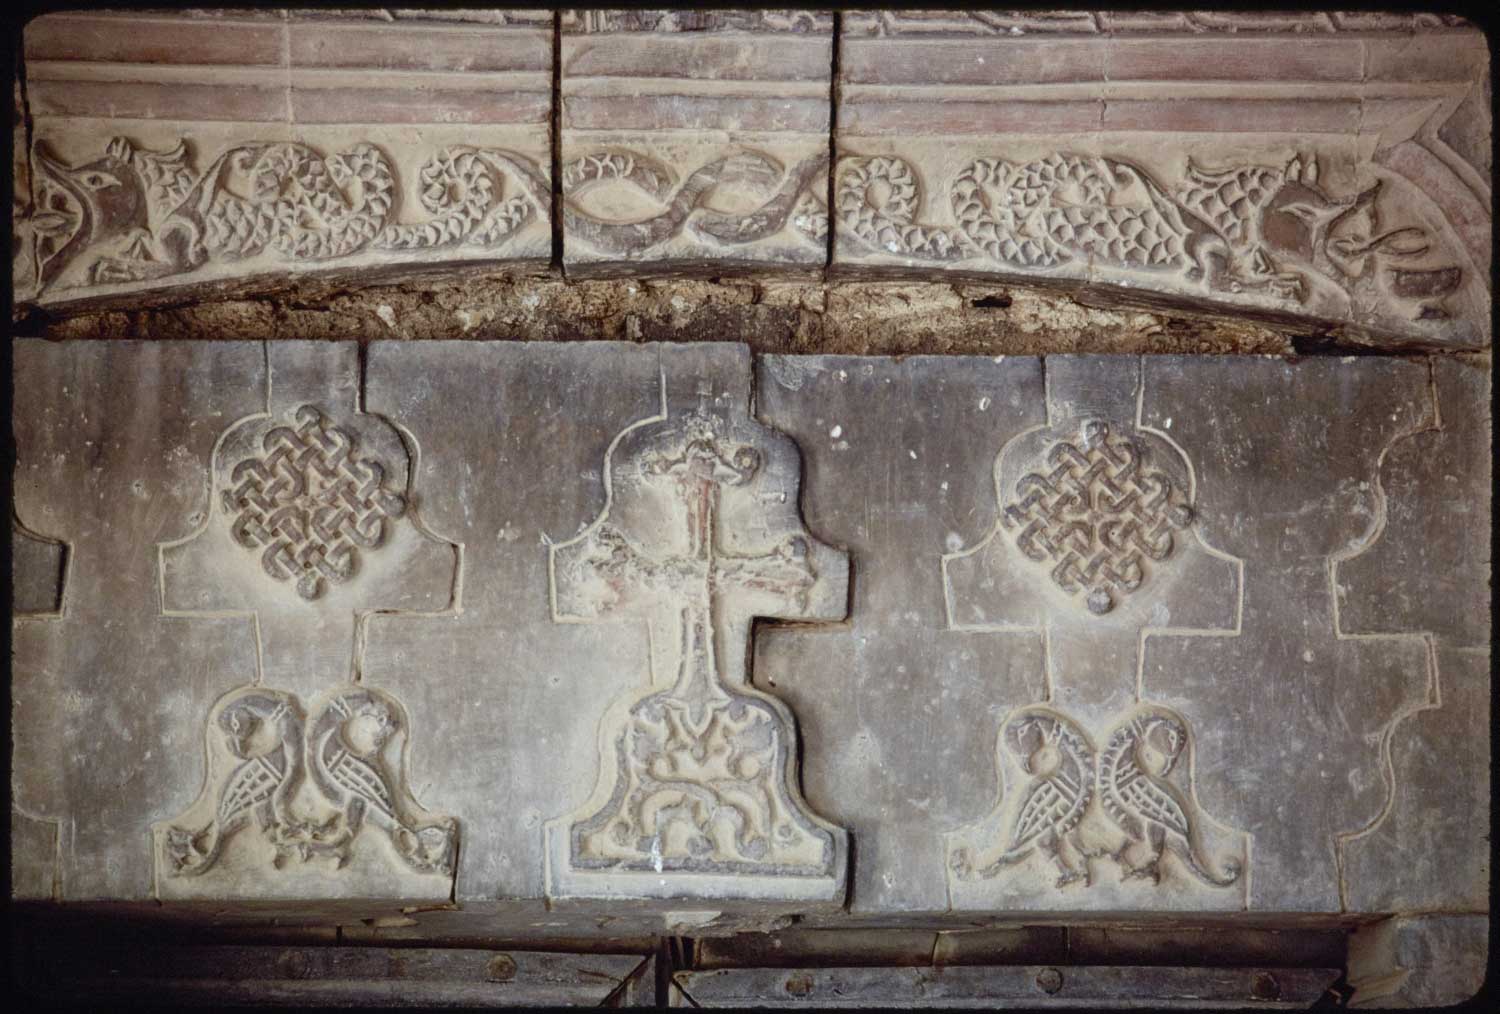 Monastic church, detail of lintel showing of southern exterior gate showing confronted birds, serpents and knotwork. 